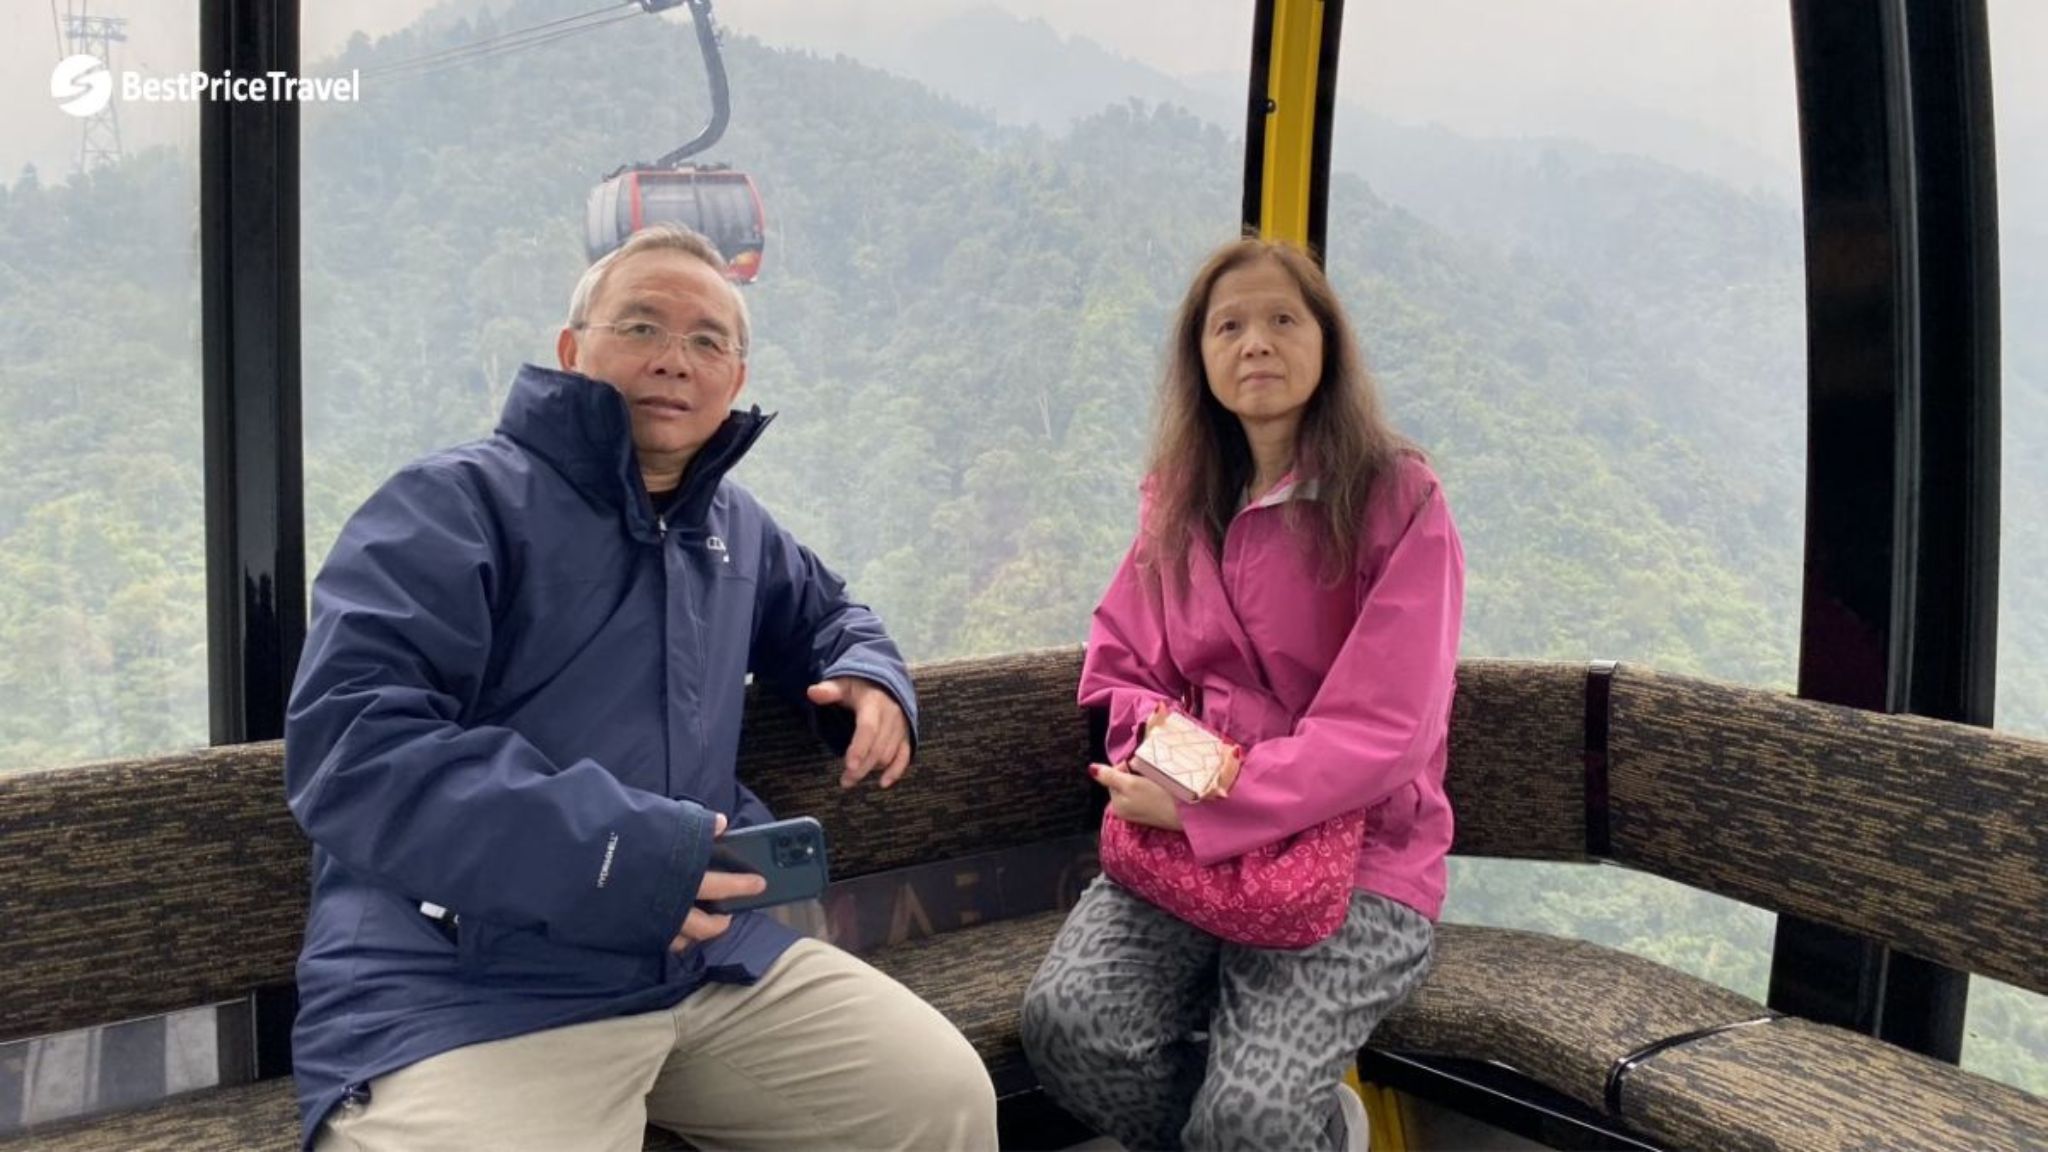 Cable Cars Transfer Tourists Through The Amazing Nature Of Sapa